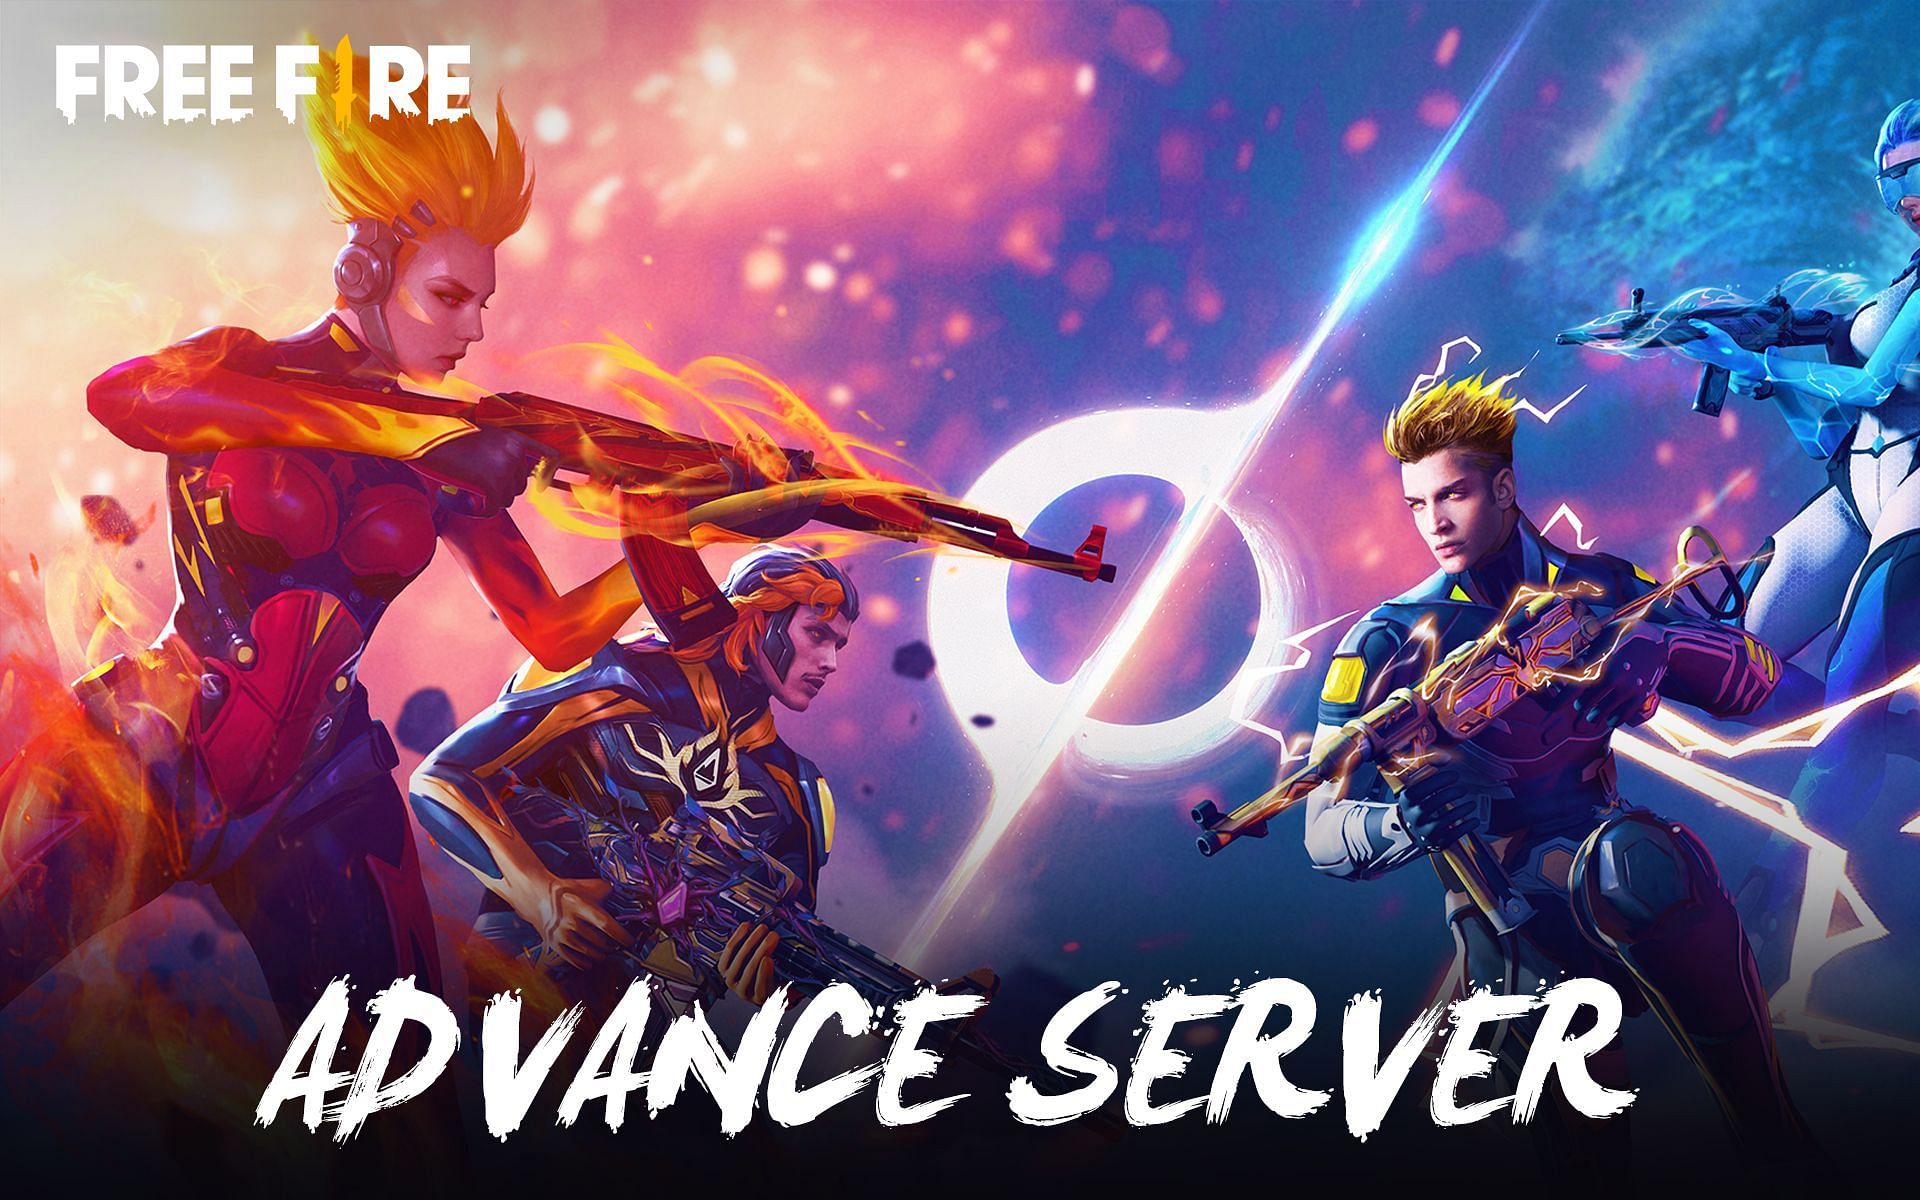 Advance Servers are released before each update (Image via Garena)